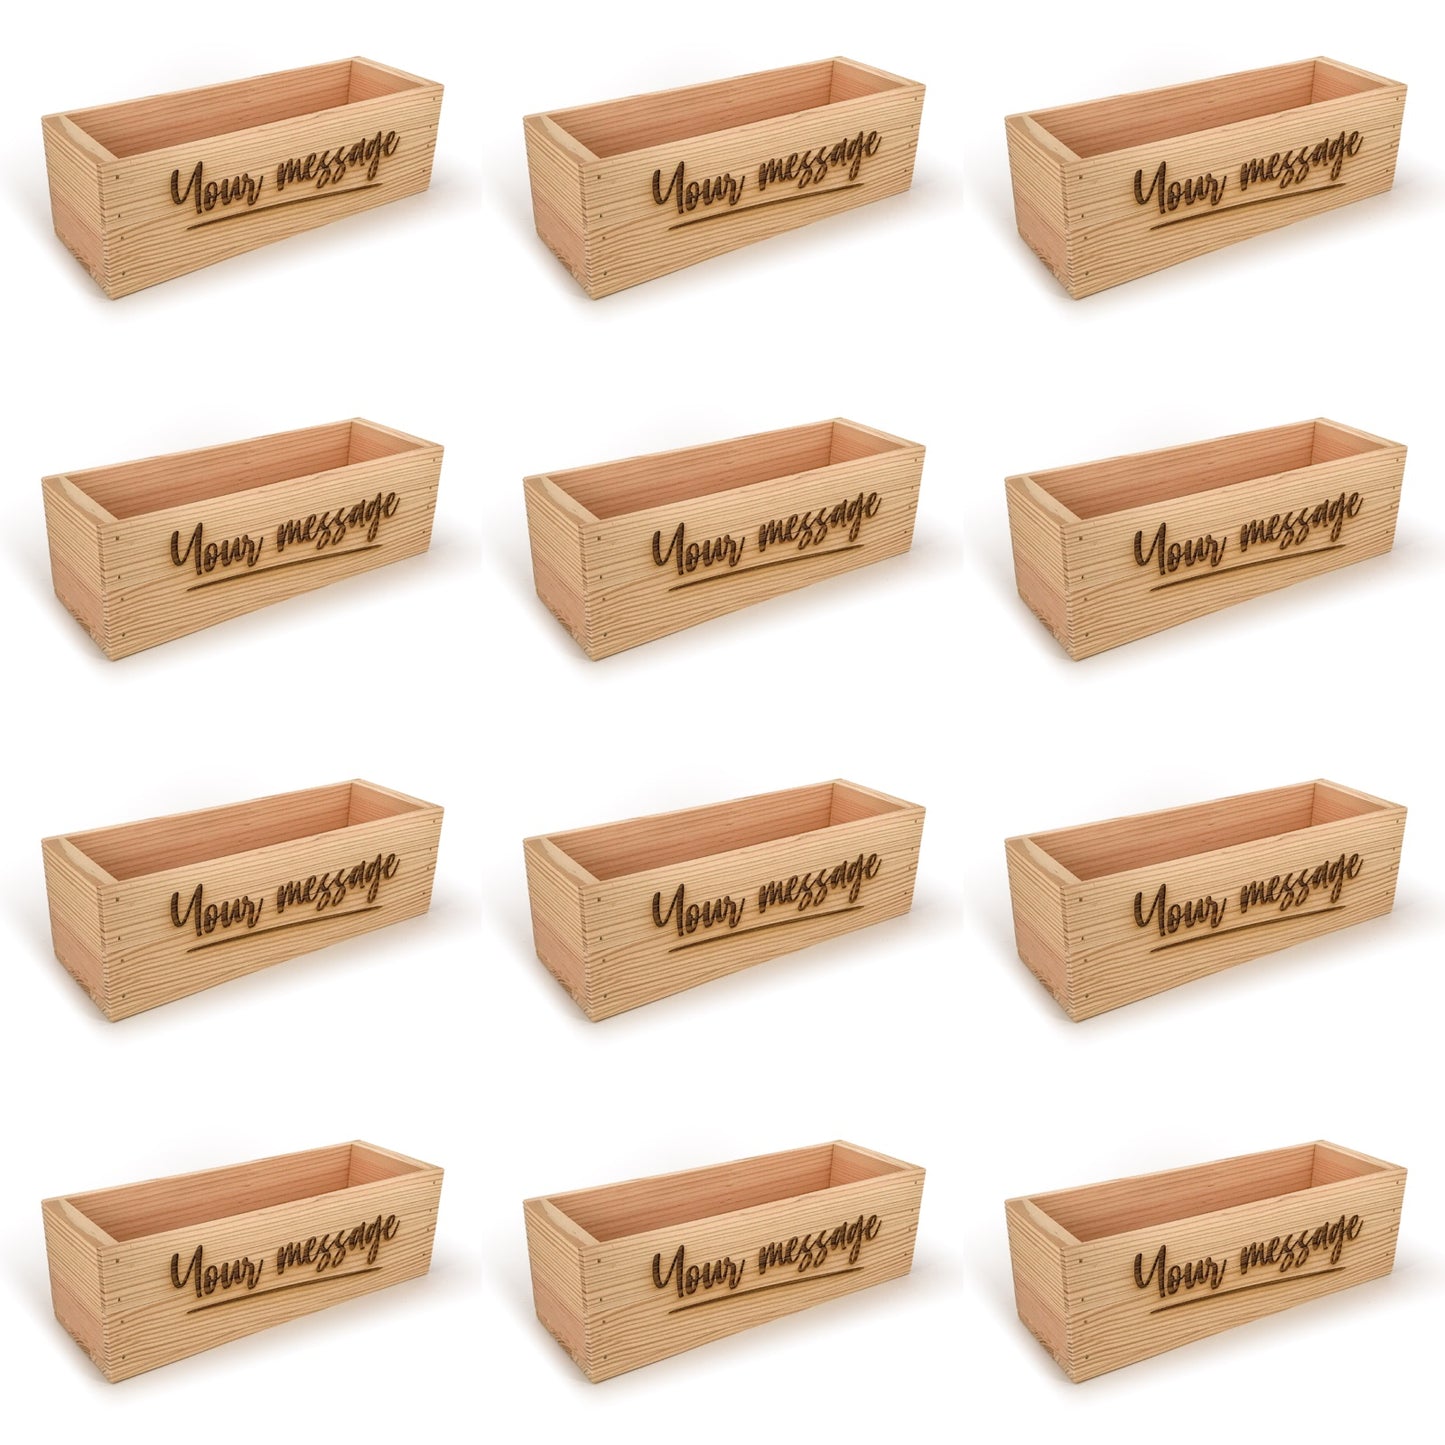 12 Single Bottle Wine Crate Box with Custom Message 14x4.5x4.5, 6-WB-14-4.5-4.5-ST-NW-NL,  12-WB-14-4.5-4.5-ST-NW-NL,  24-WB-14-4.5-4.5-ST-NW-NL,  48-WB-14-4.5-4.5-ST-NW-NL,  96-WB-14-4.5-4.5-ST-NW-NL